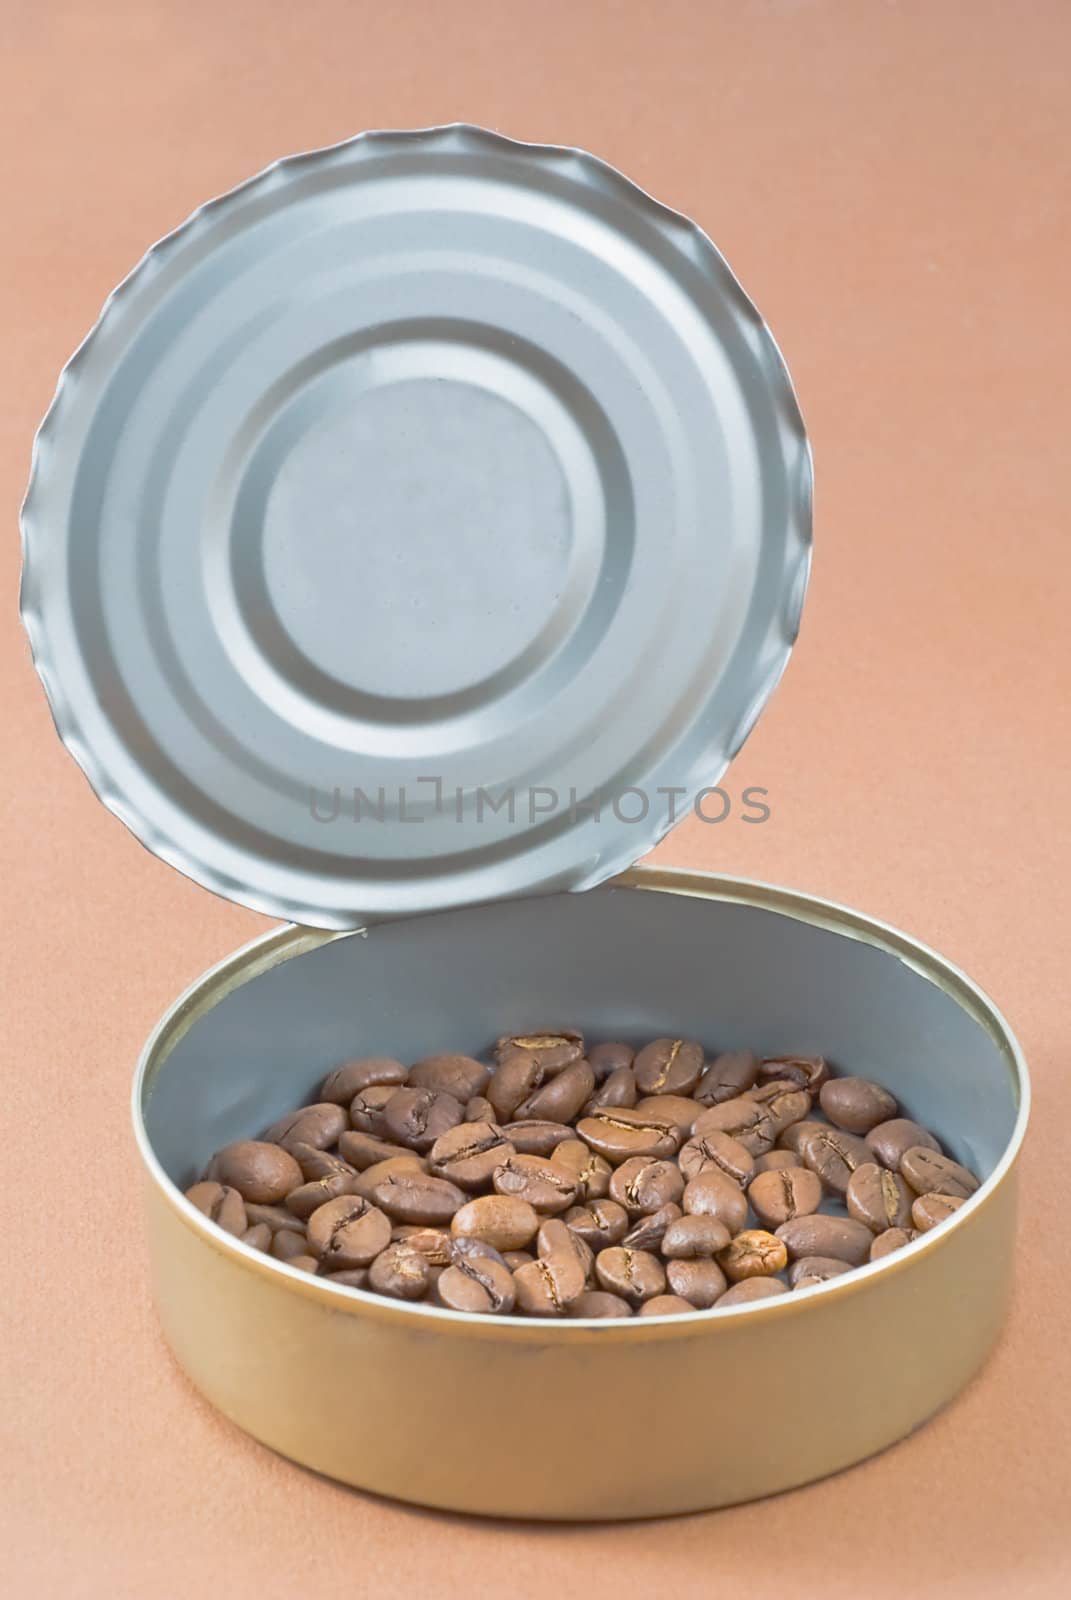 The seeds lie in a metal coffee cans